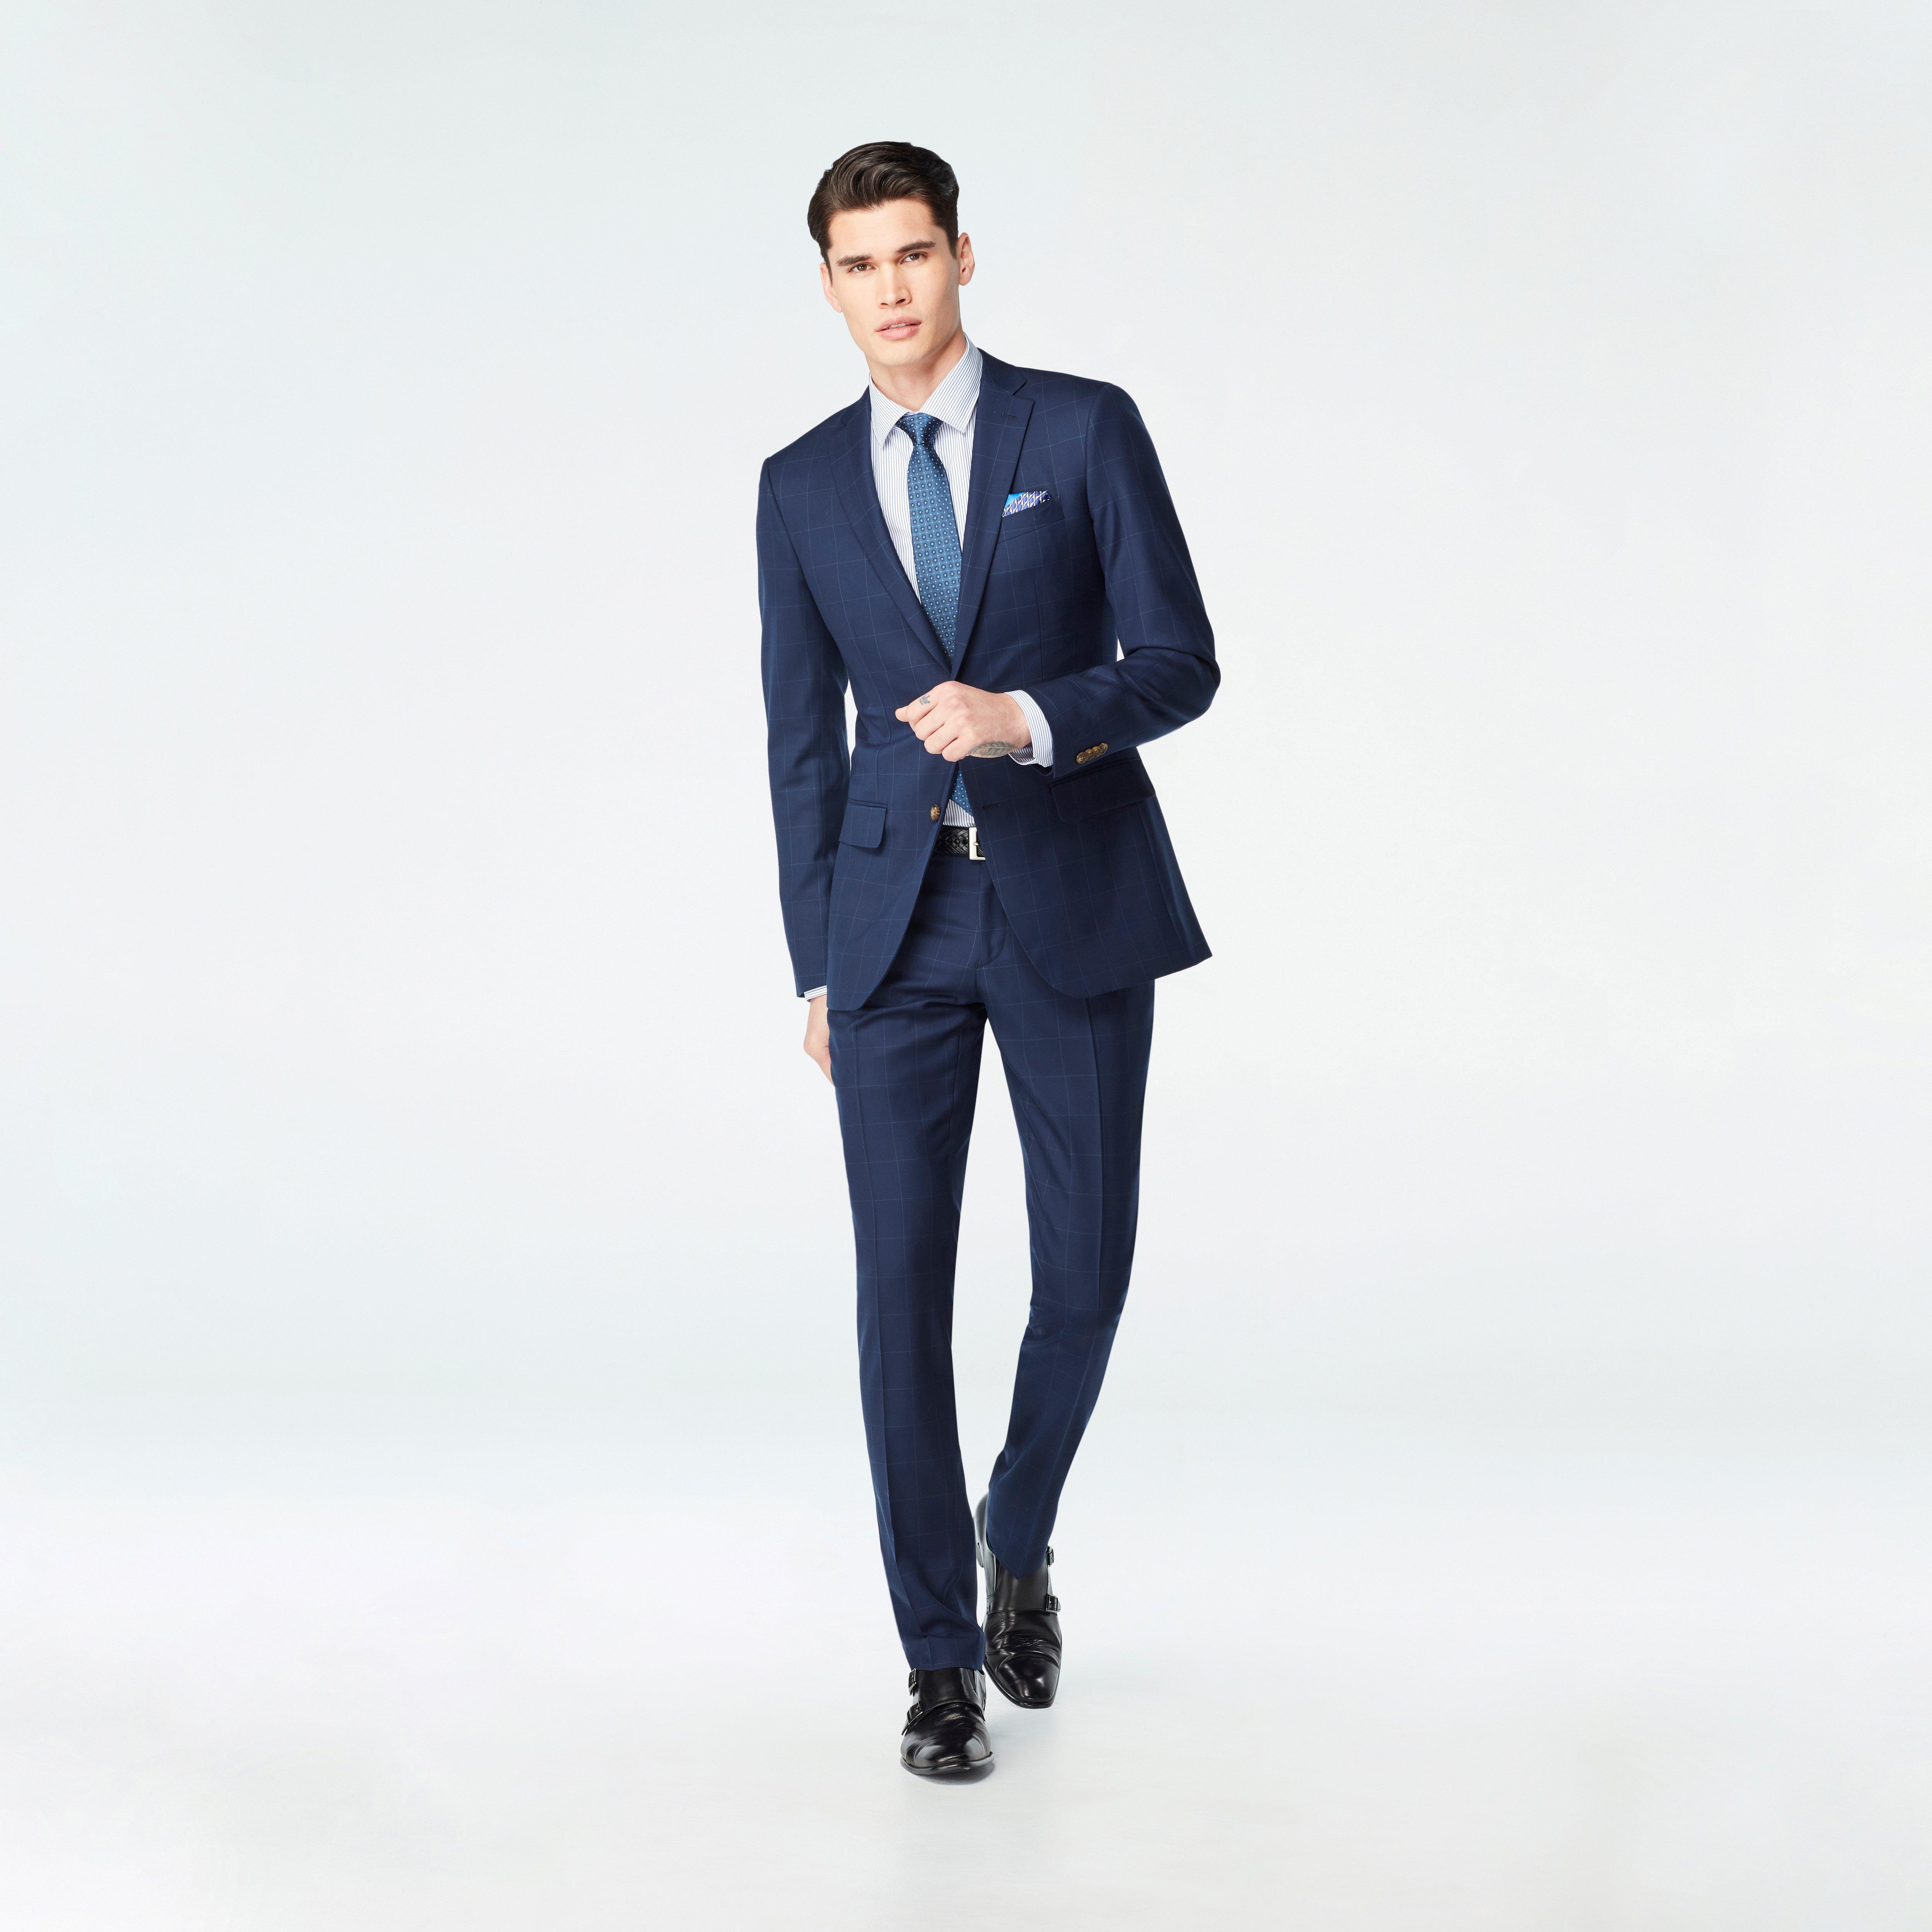 Custom Suits Made For You - Harrogate Windowpane Navy Suit | INDOCHINO